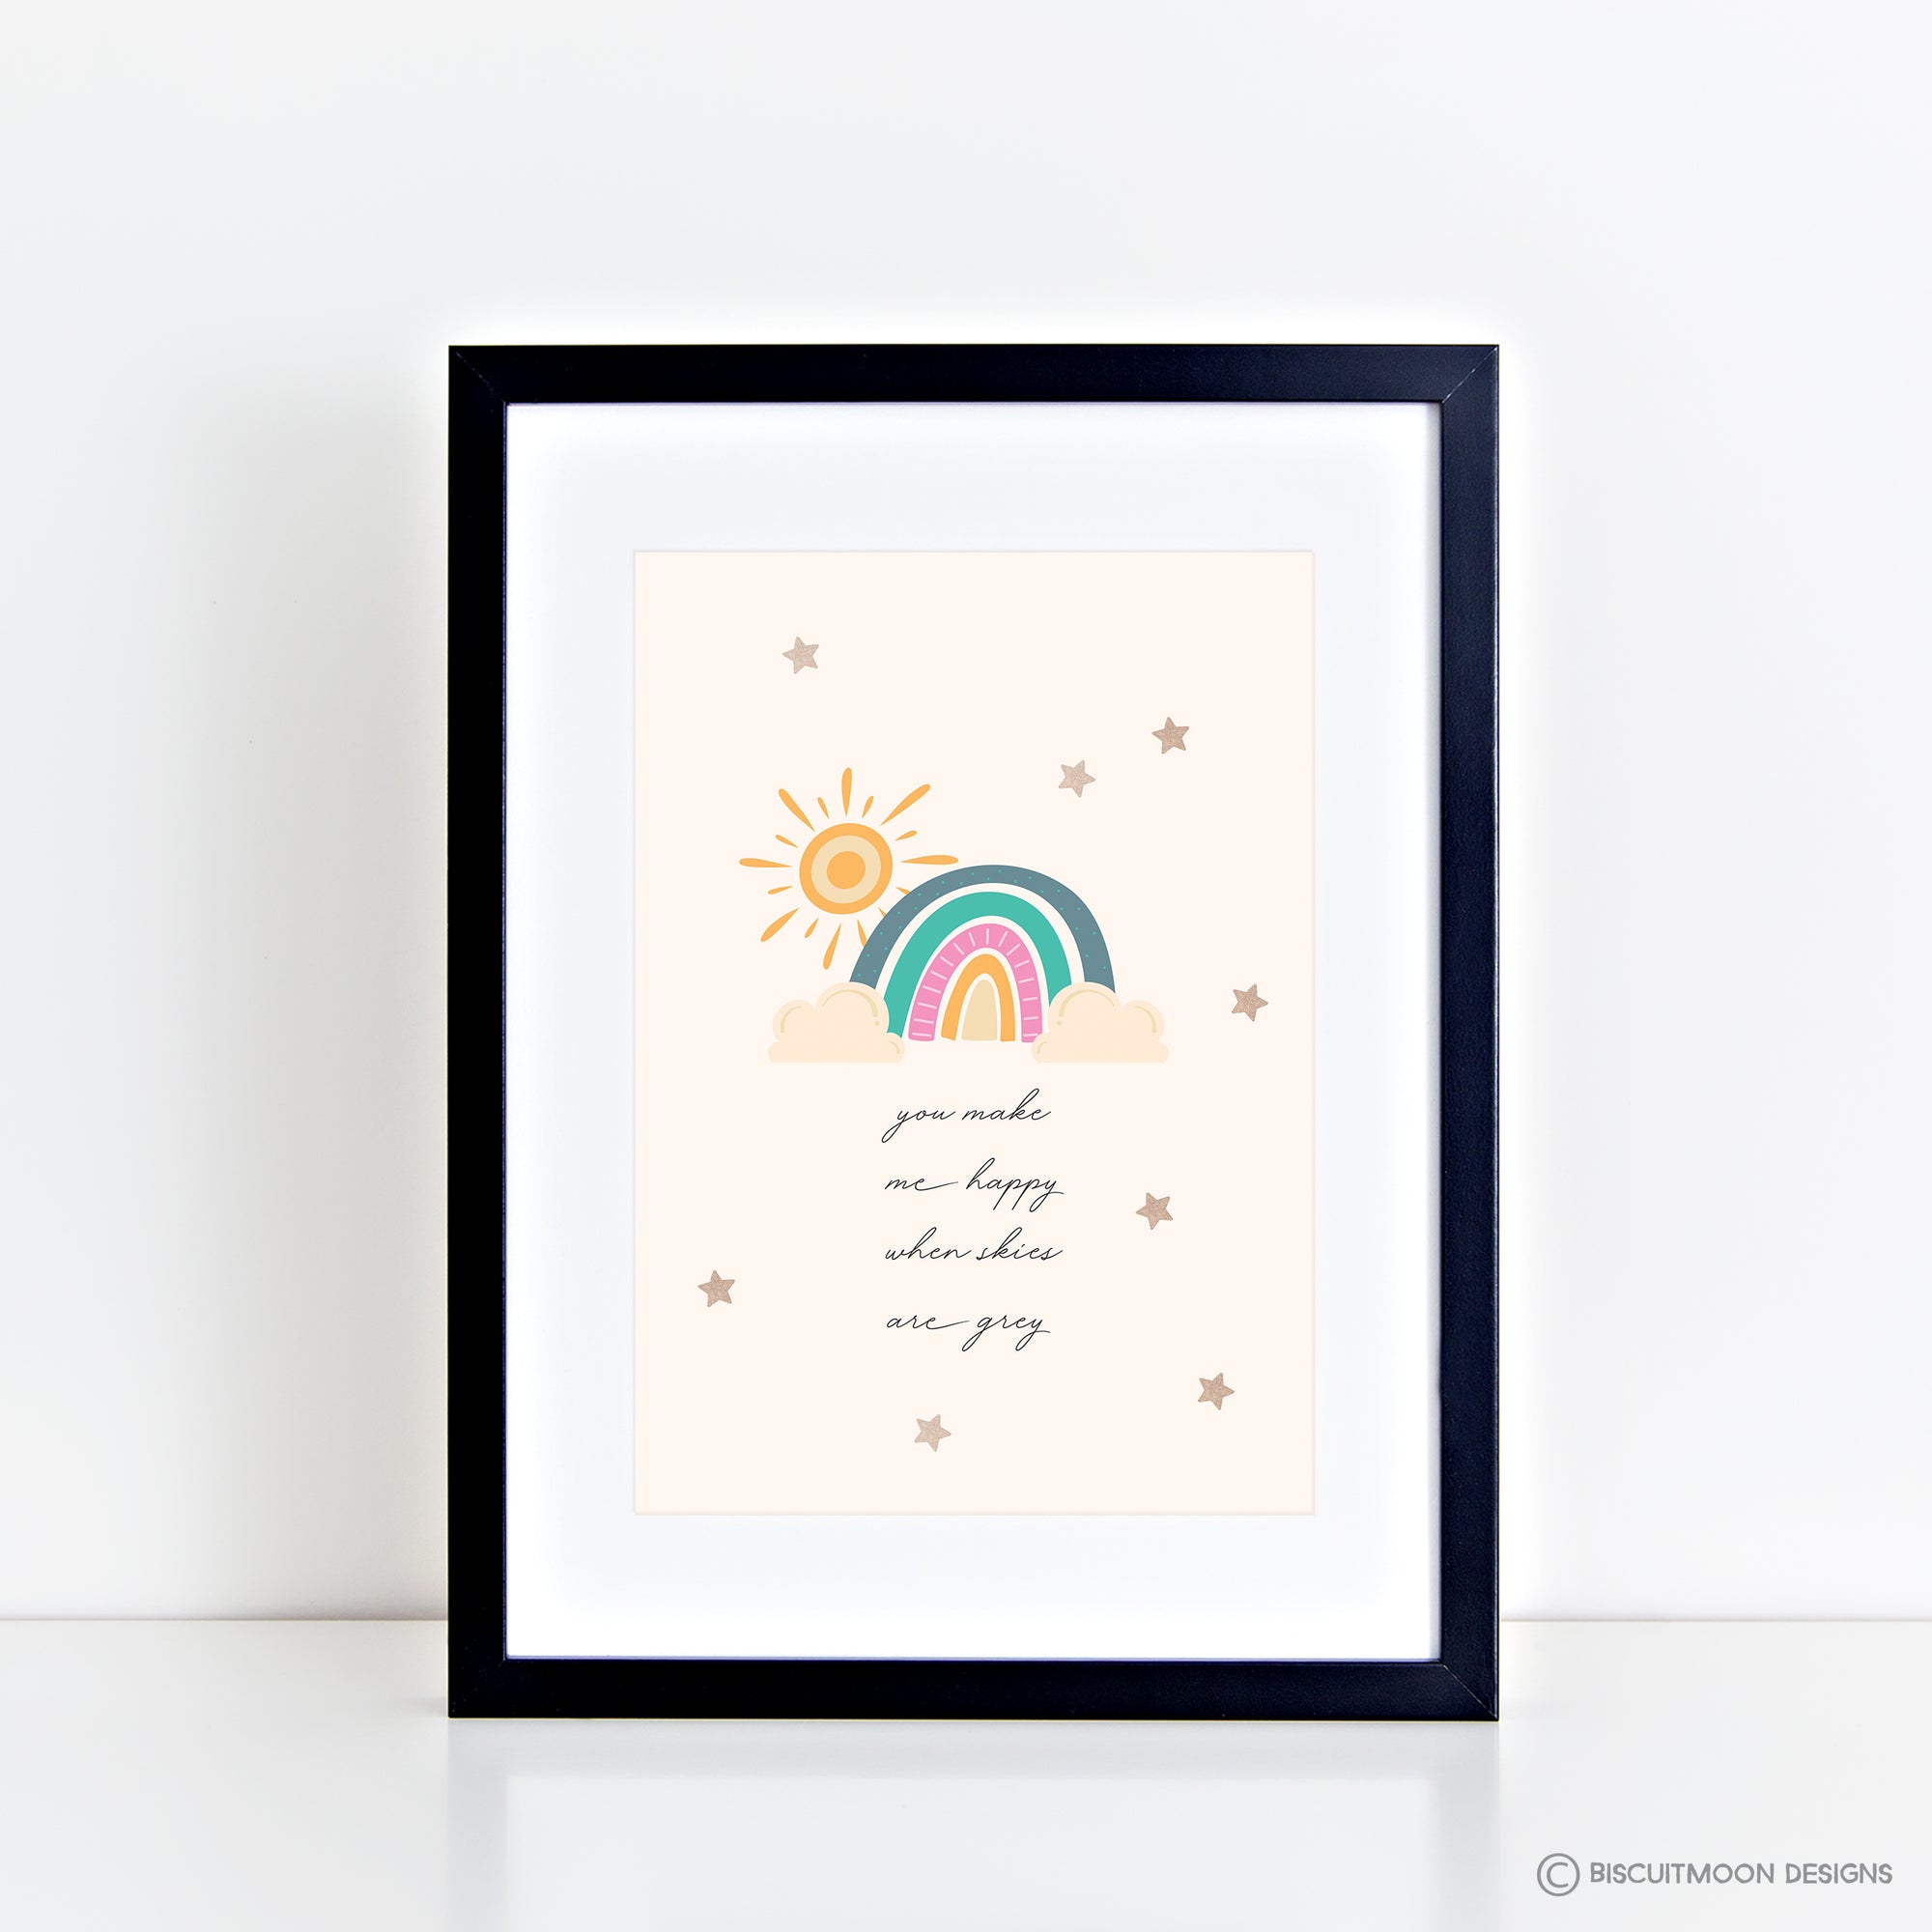 You Make Me Happy When Skies are Grey Print